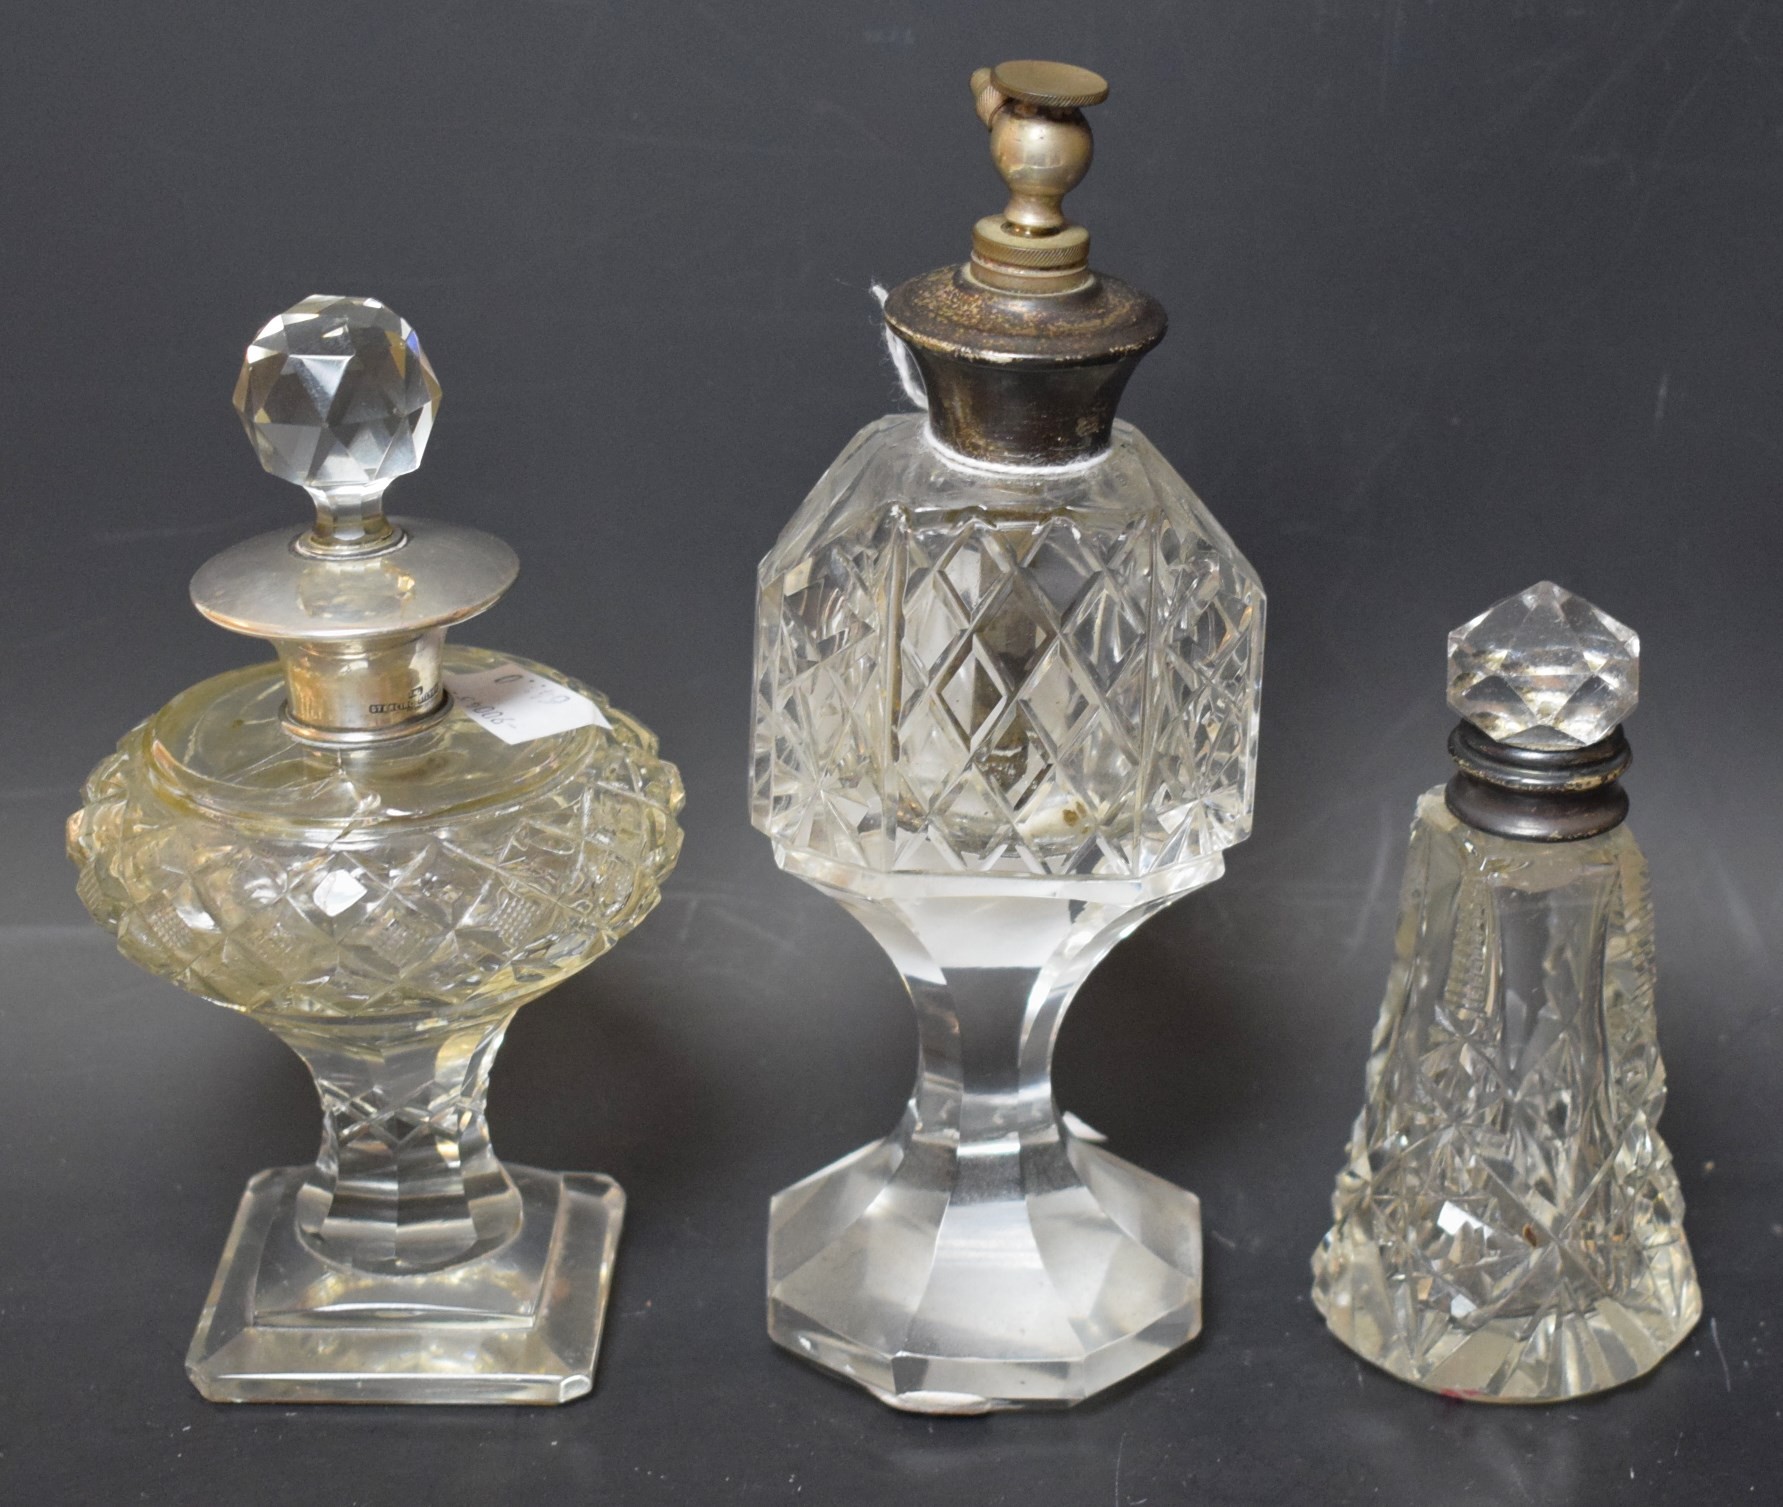 Three cut glass scent bottles with silver tops